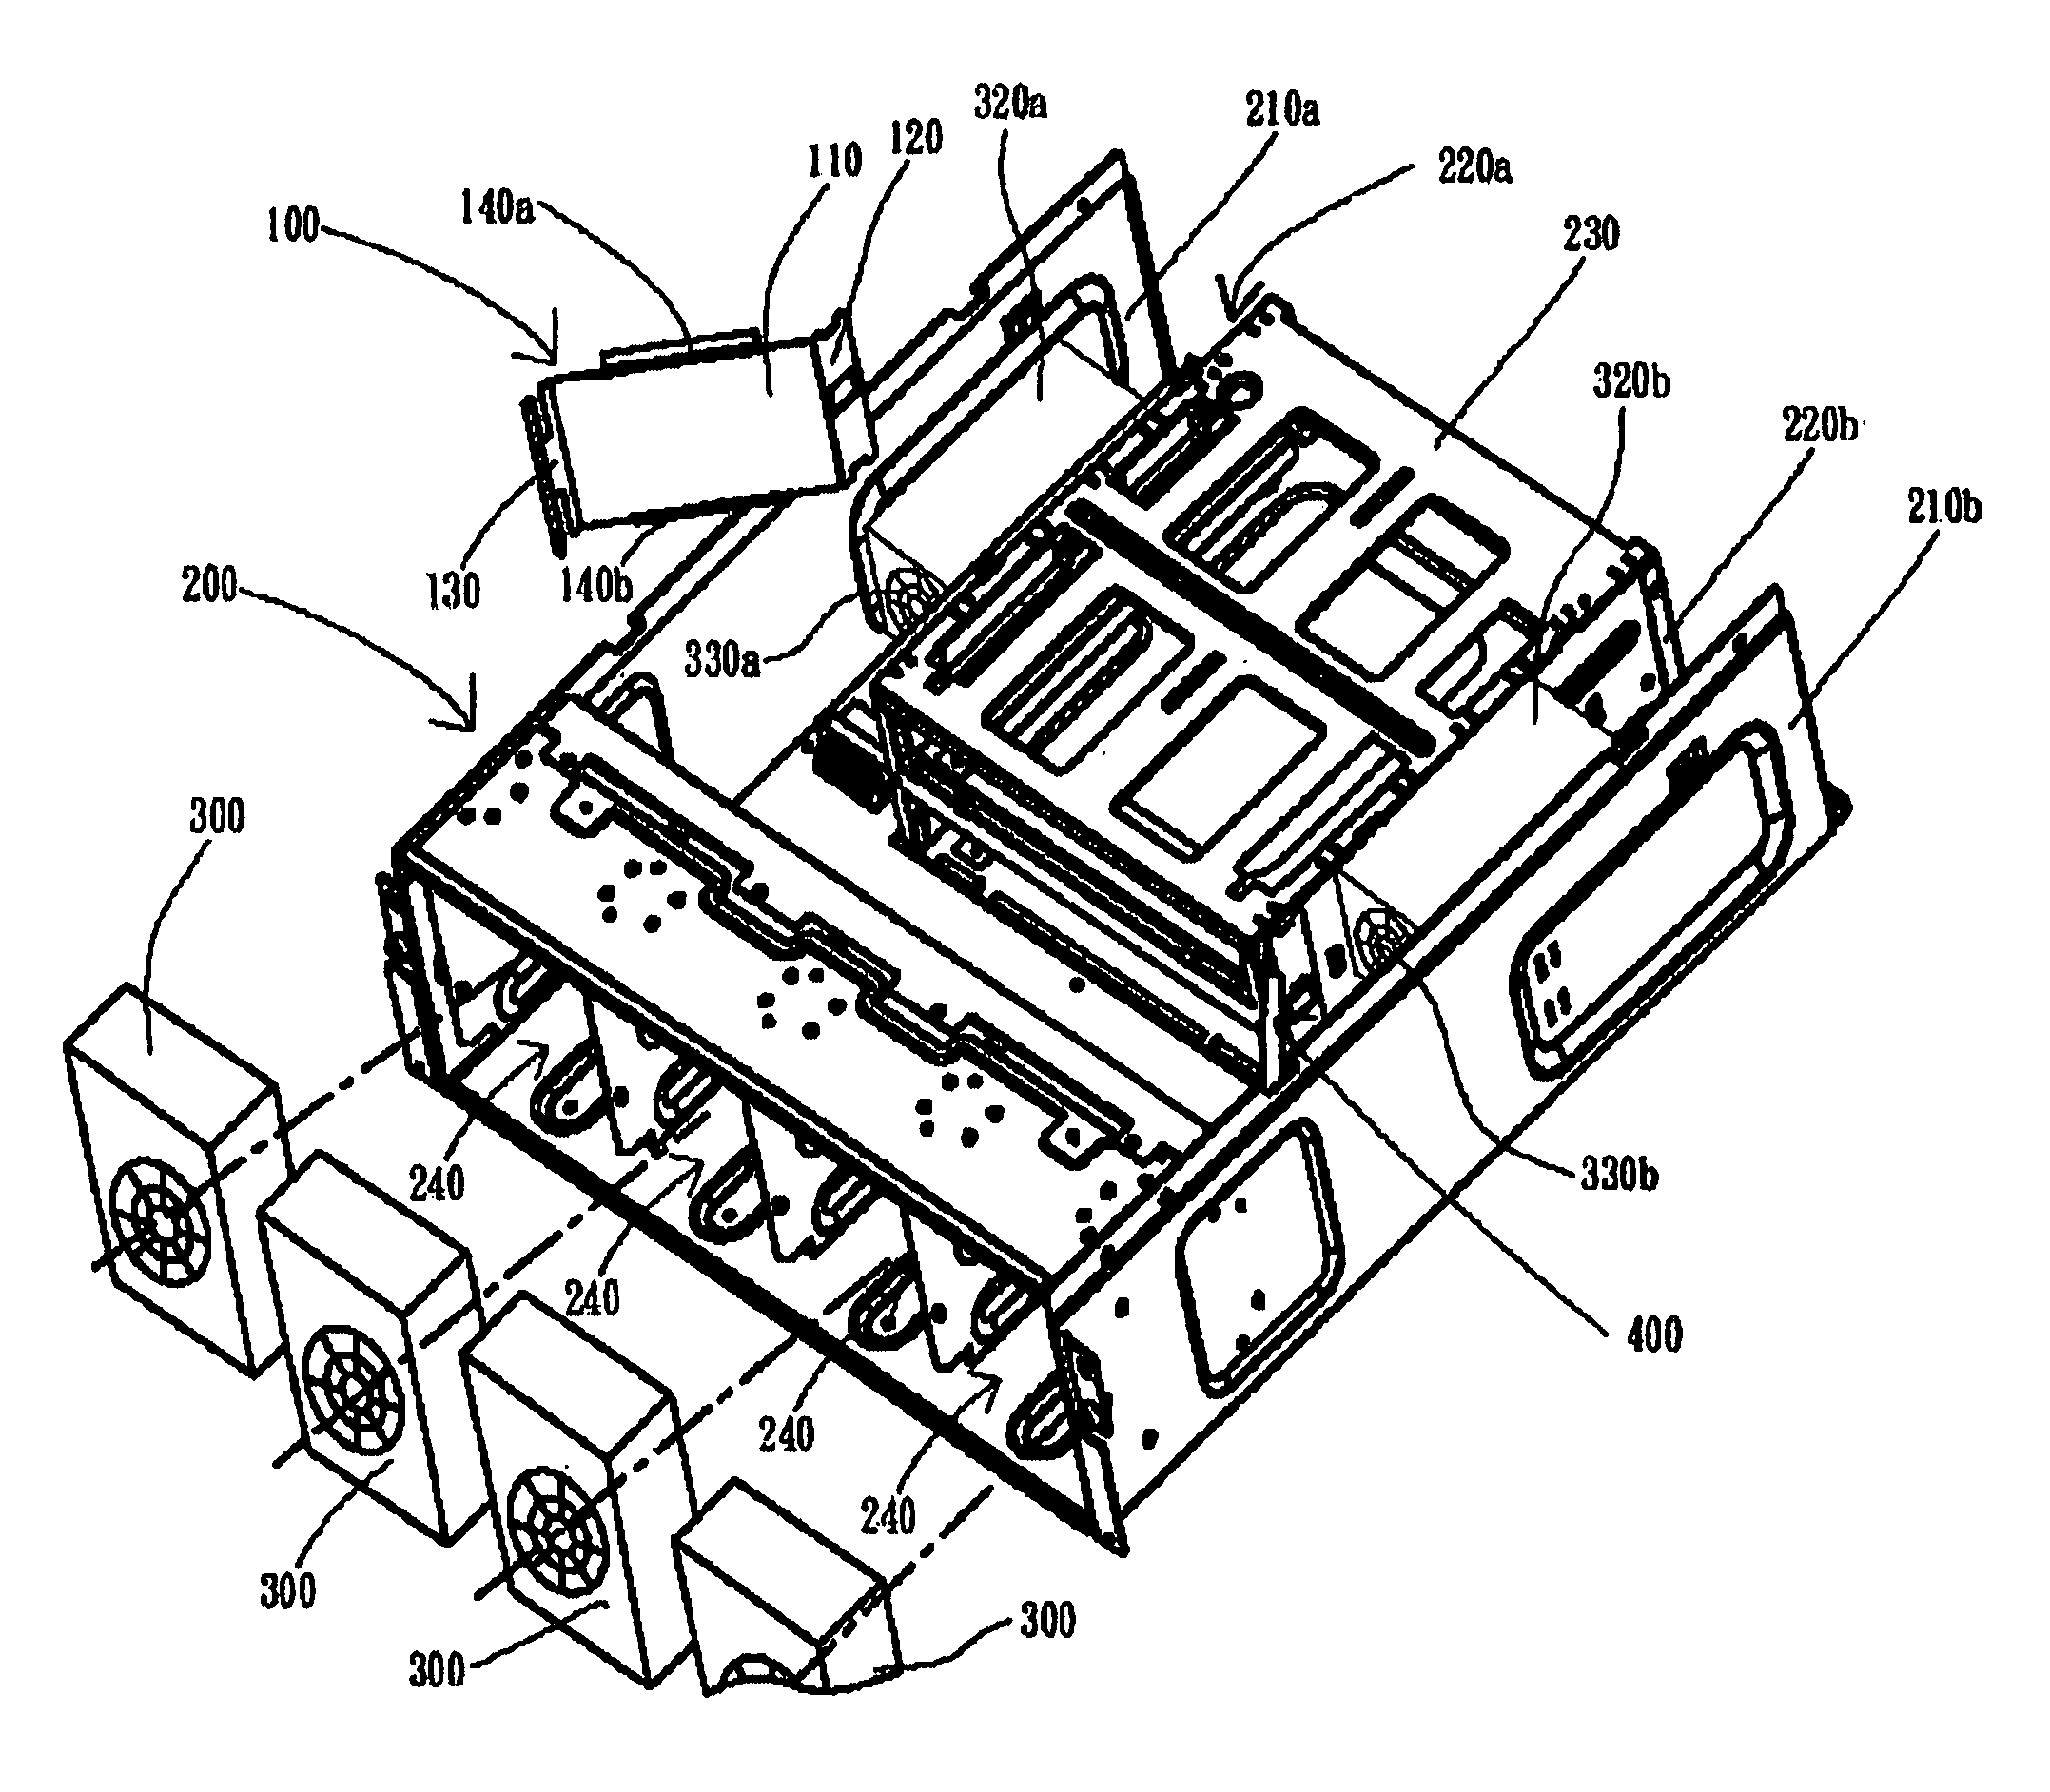 Electronic product having airflow-guiding device